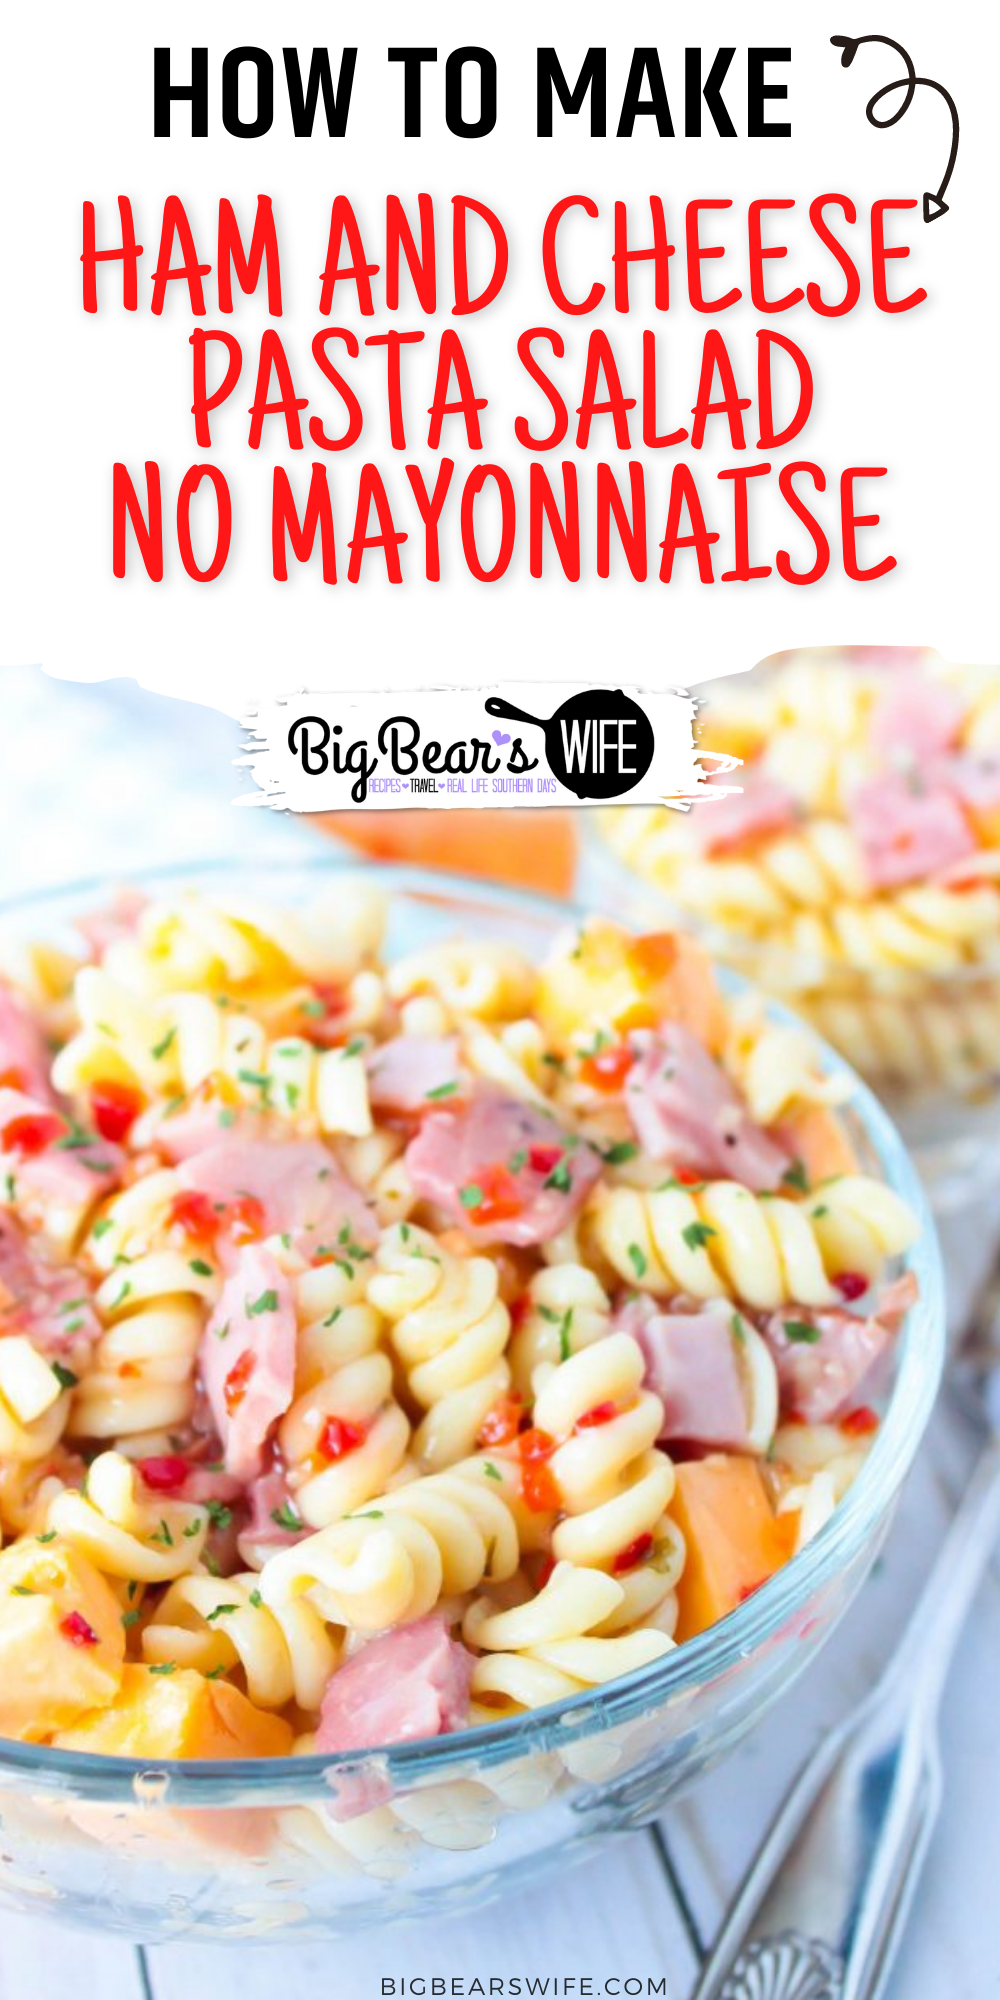 Looking for the perfect pasta salad to take to that family cookout or neighborhood block party? This Ham and Cheese Pasta Salad would be perfect! Plus, it's made without mayo, so it's safe to set out for a bit!  via @bigbearswife